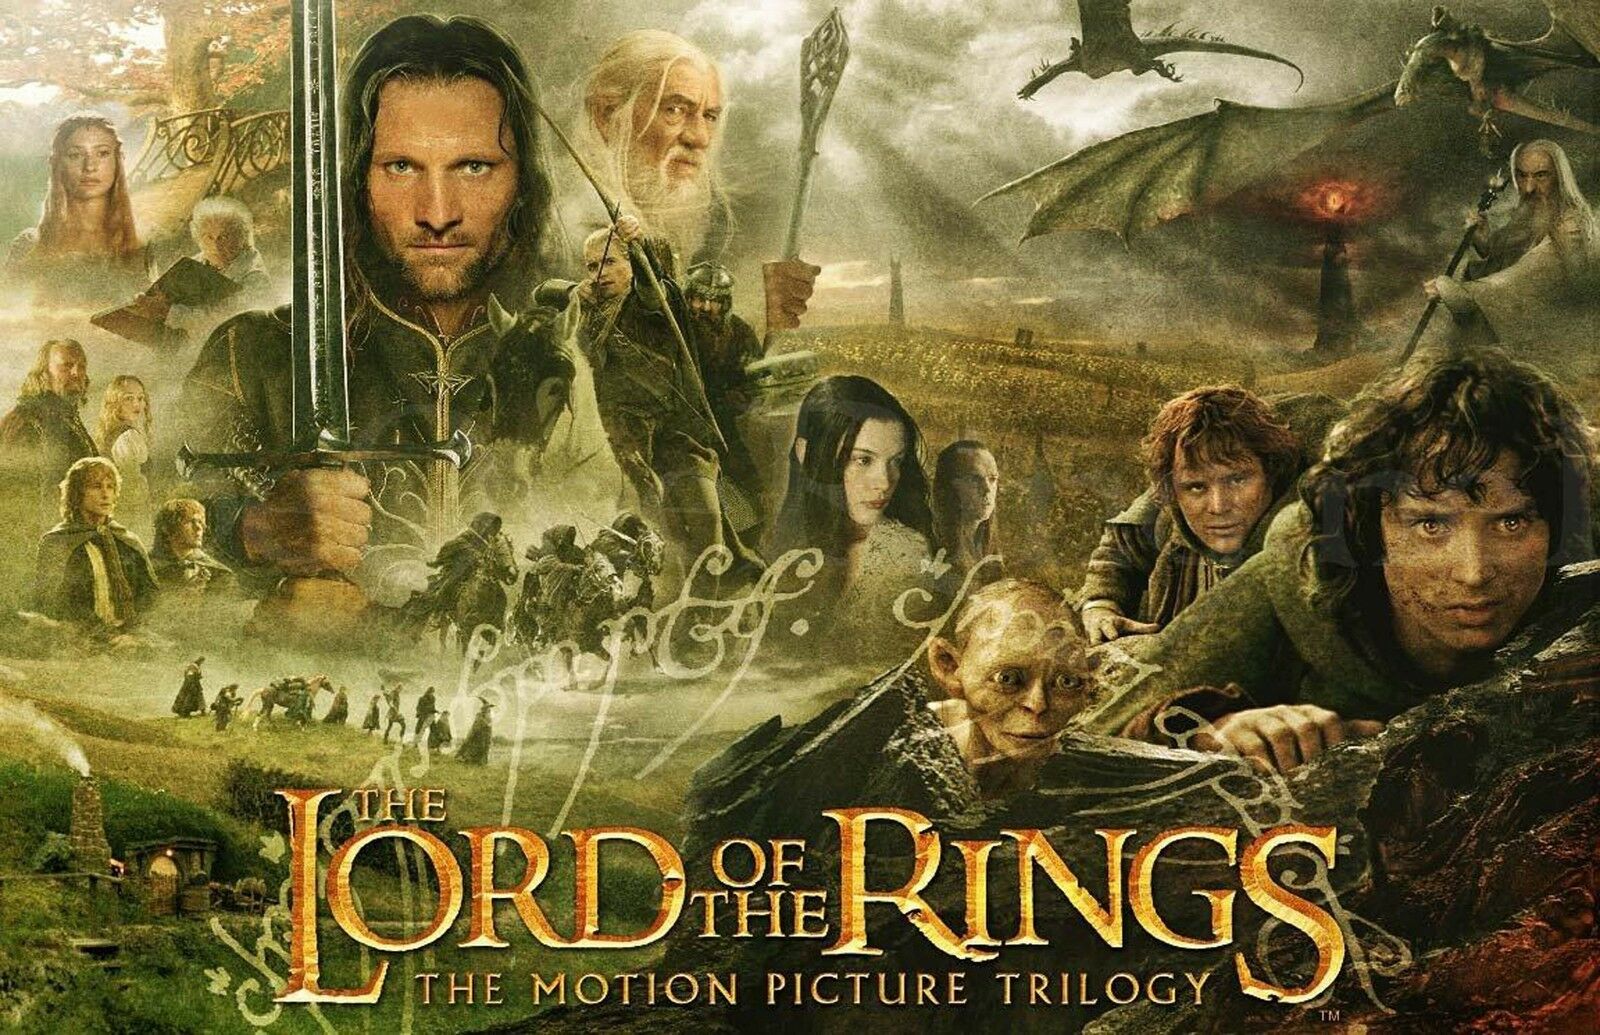 the hobbit trilogy and the lord of the rings trilogy extended edition us region